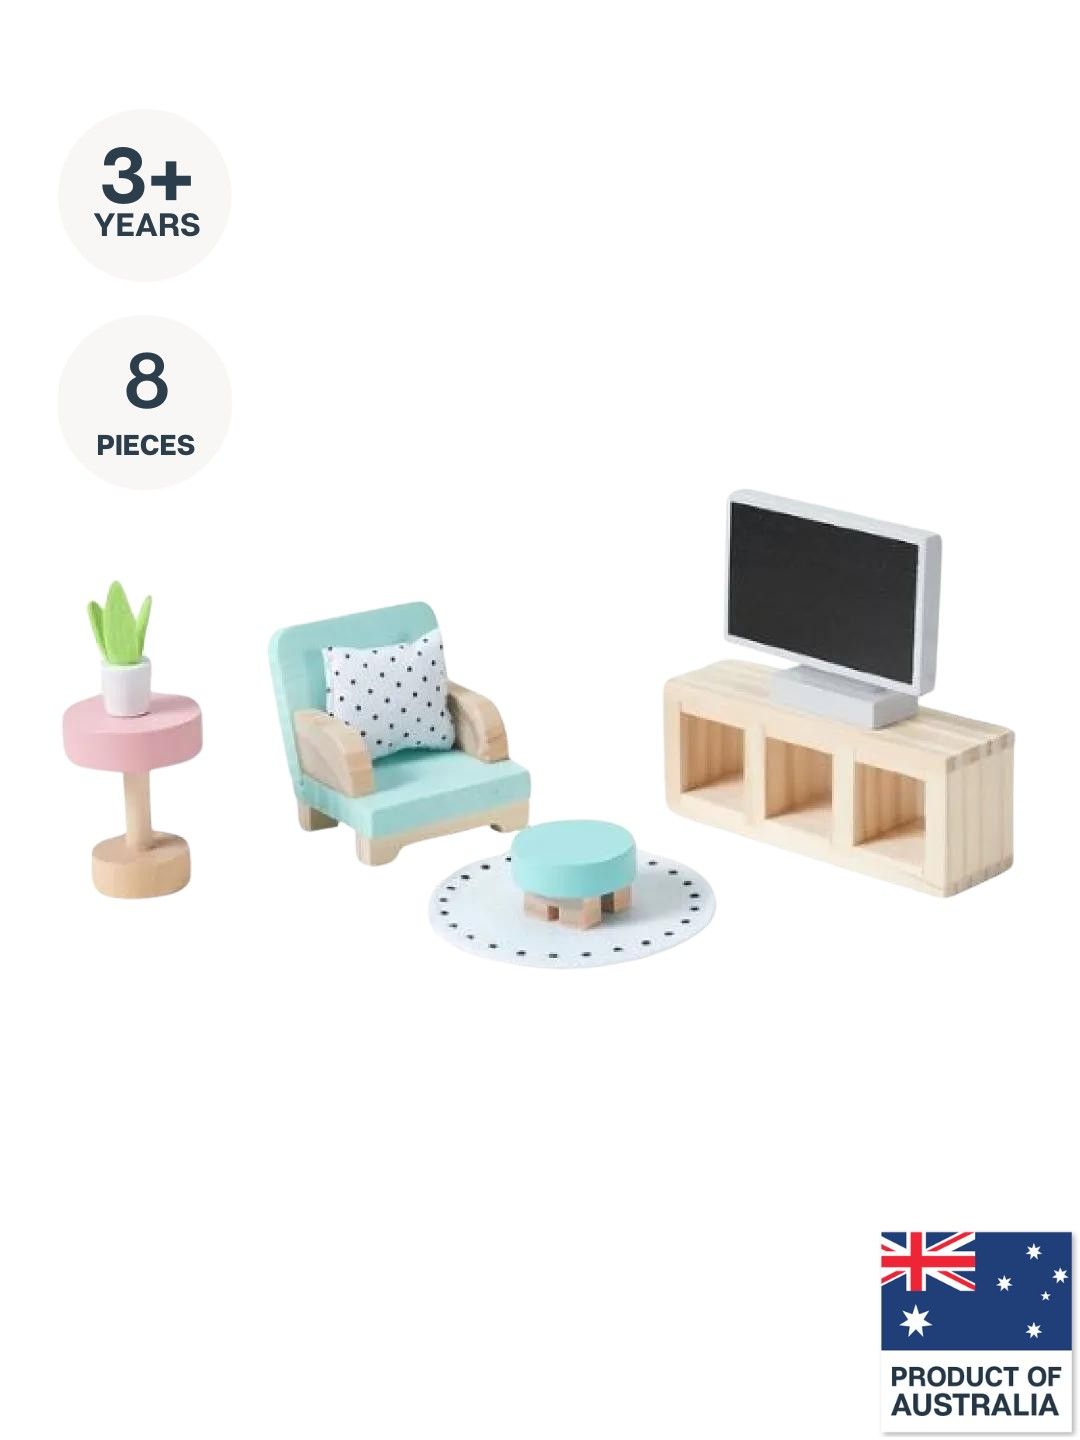 Anko Wooden Doll House Living Room Furniture Set